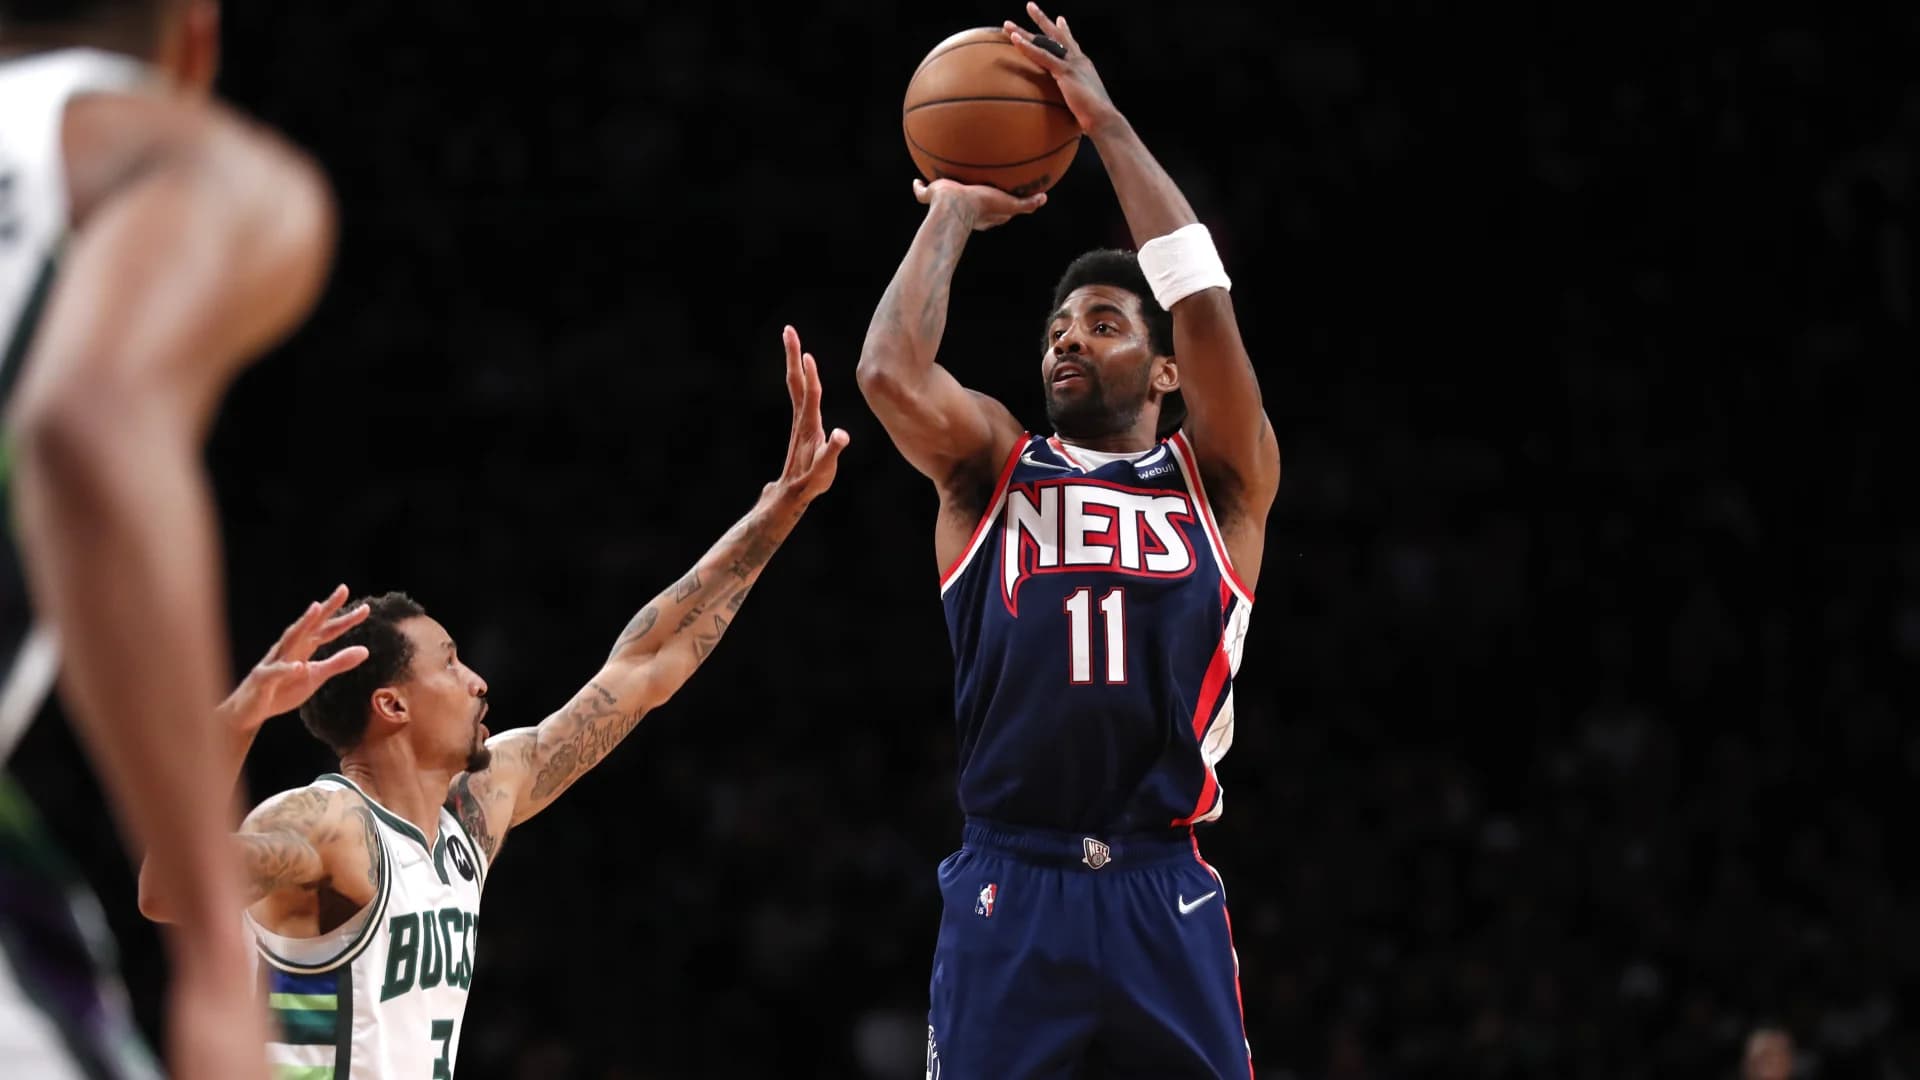 For future with team, Nets want more commitment from Irving